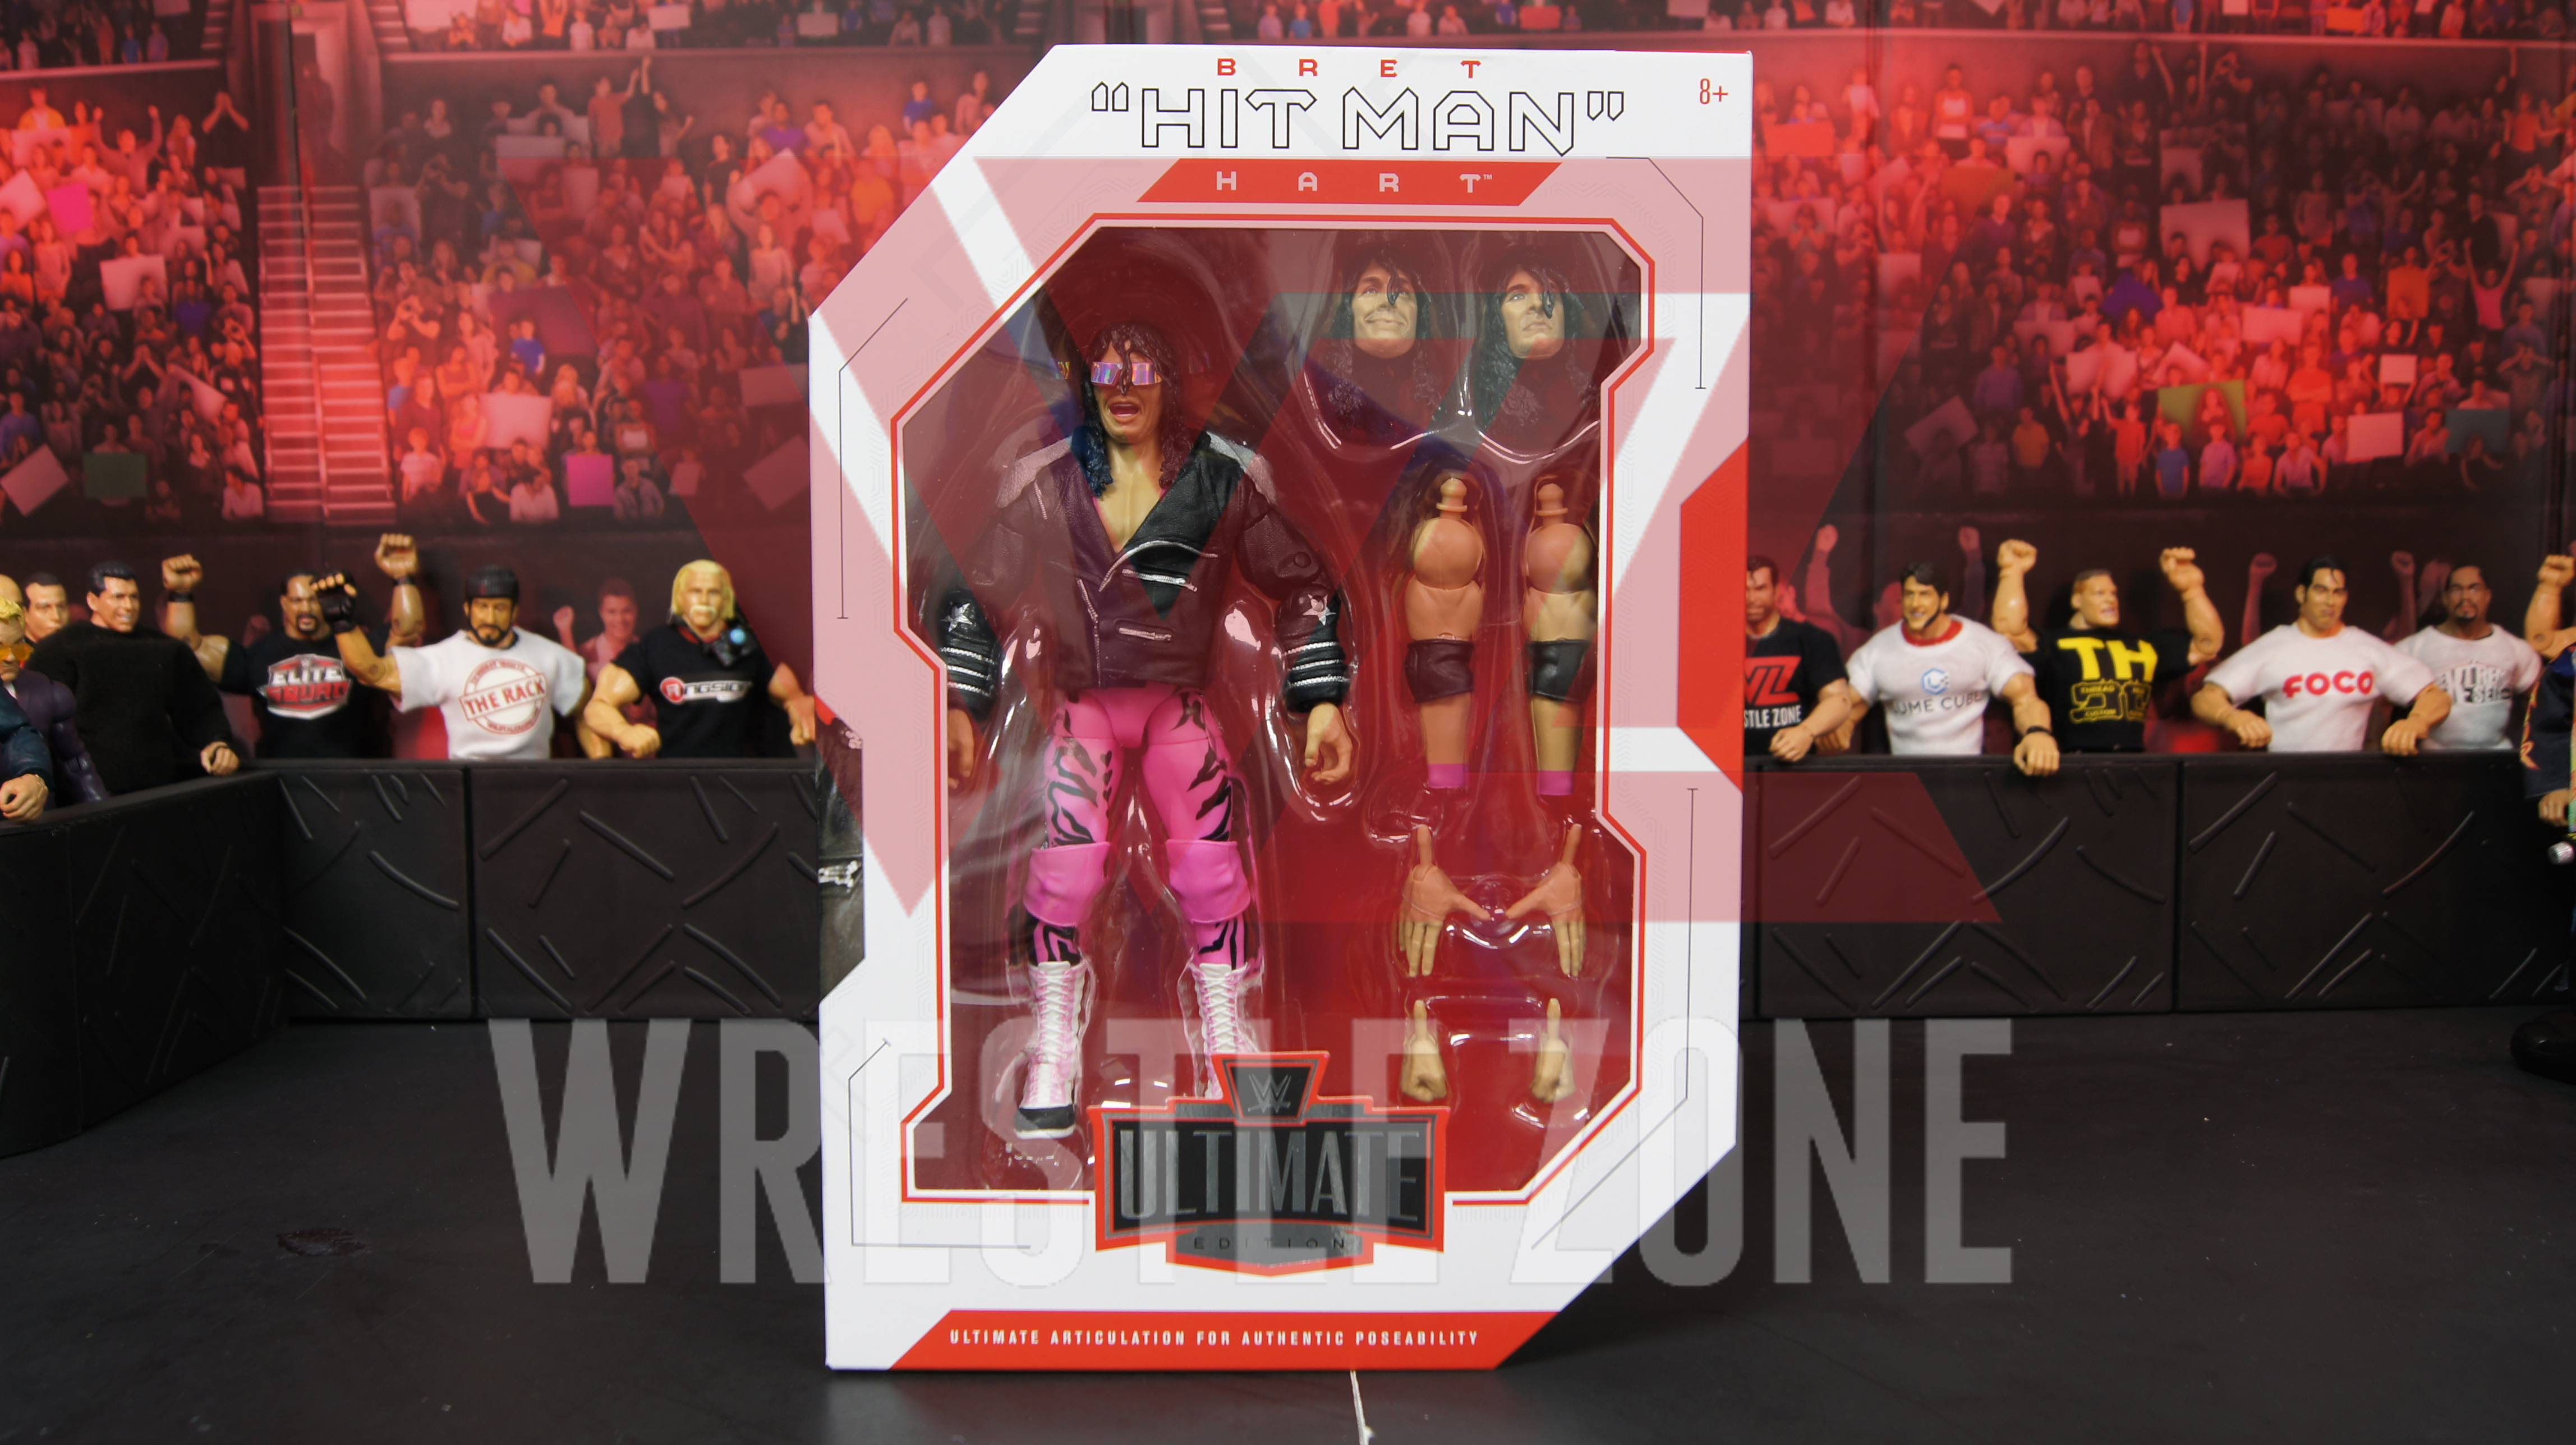 Wwe_ultimate_edition_series2_bret_a